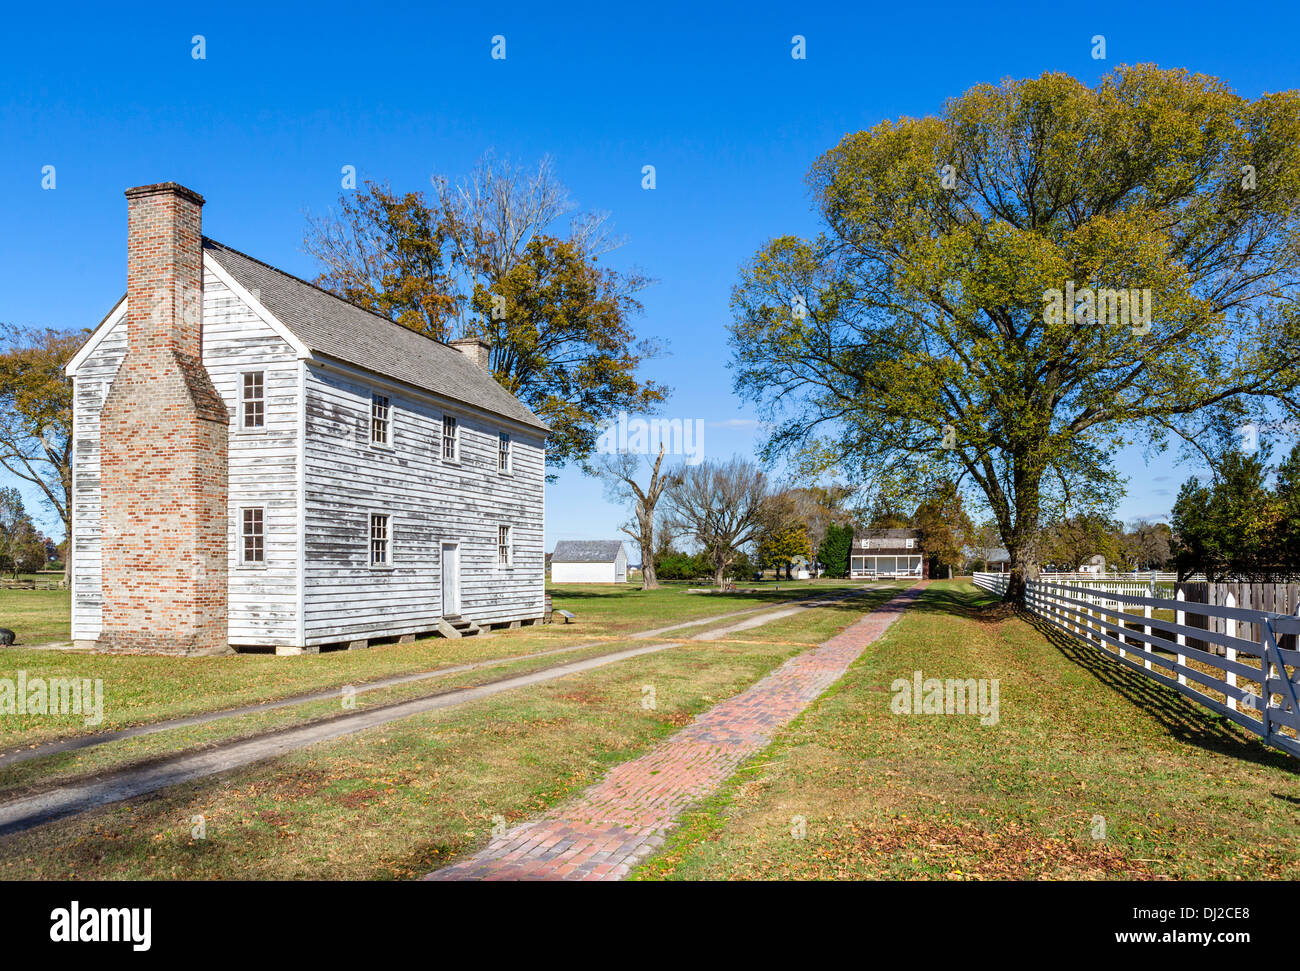 Reconstructed buildings at Somerset Place Plantation State Historic Site, Cresswell, Albemarle region, North Carolina, USA Stock Photo